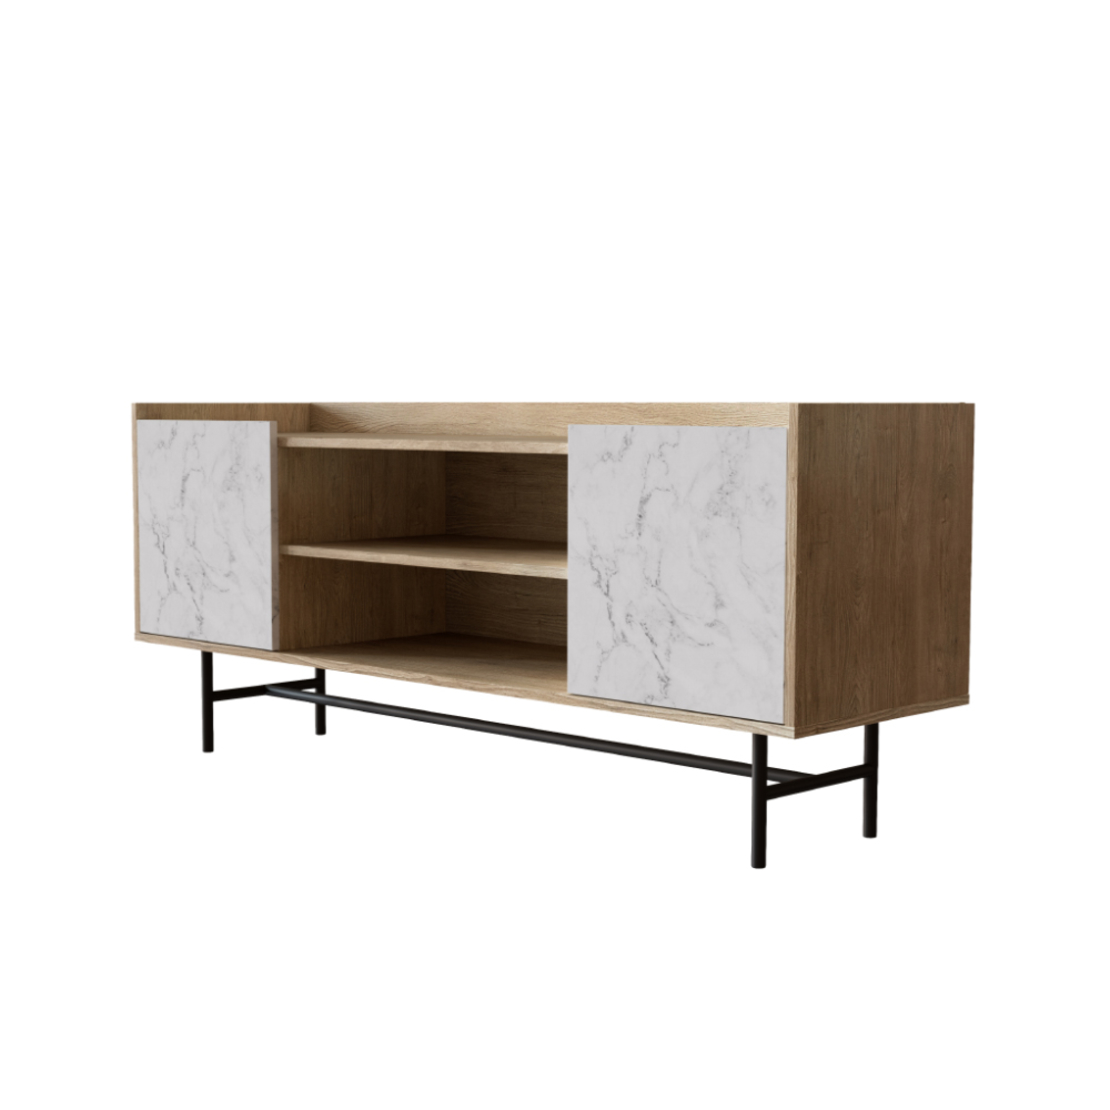 STOCKHOLM TV STAND CHIPBOARD WITH MELAMINE CARTA SONOMA DECAPE WHITE WITH MARBLE PATTERN METAL BLACK 140x39,5xH60cm E1 PRC